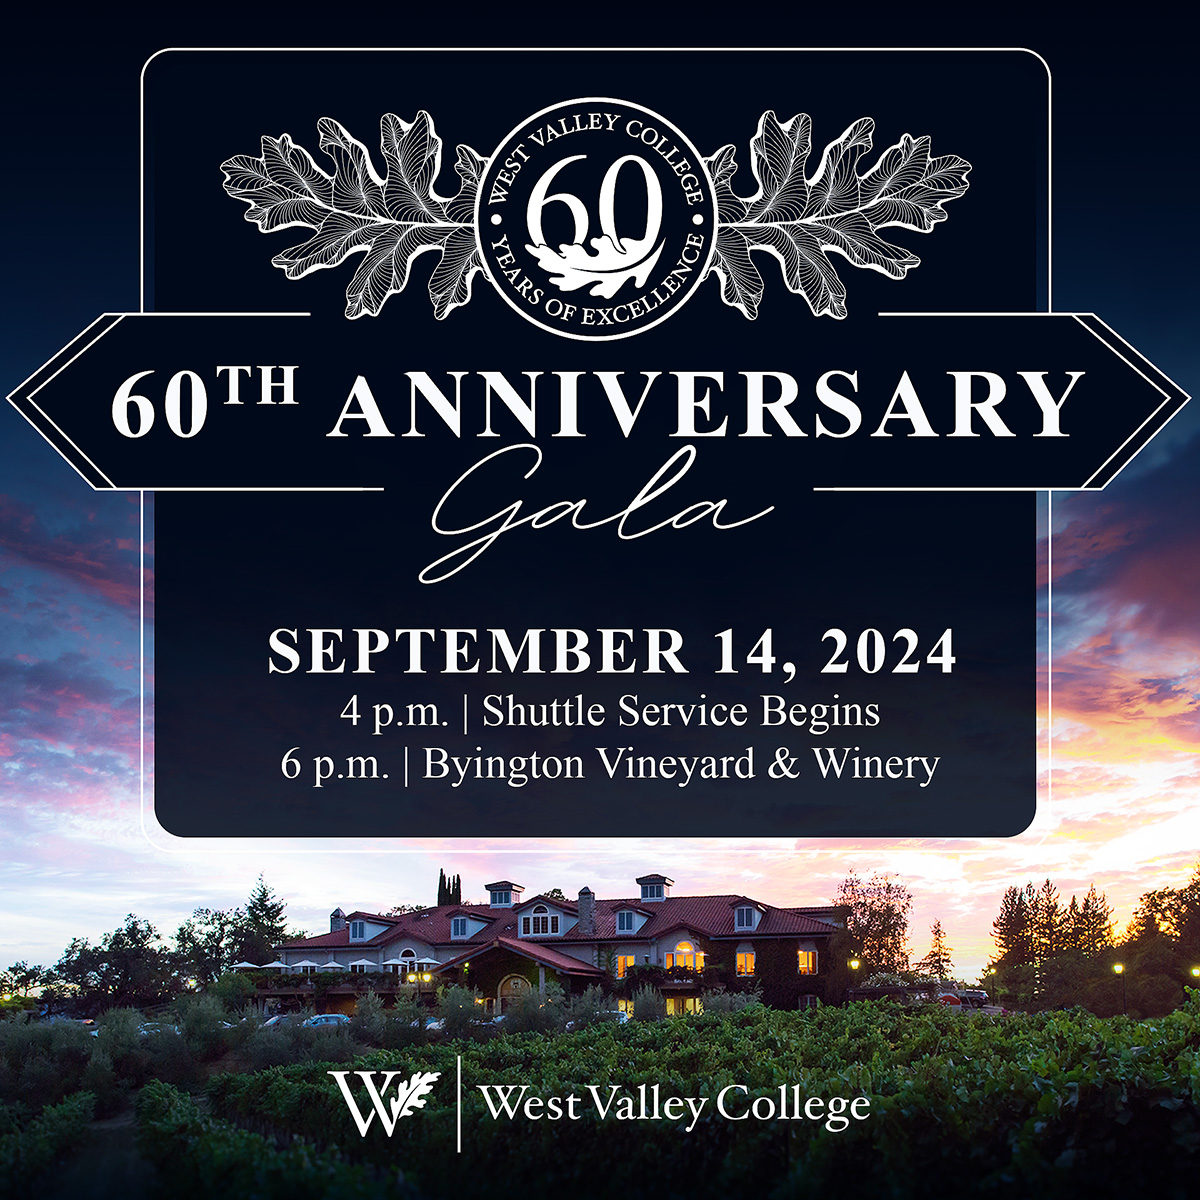 60th Anniversary Gala with image of Byington Winery